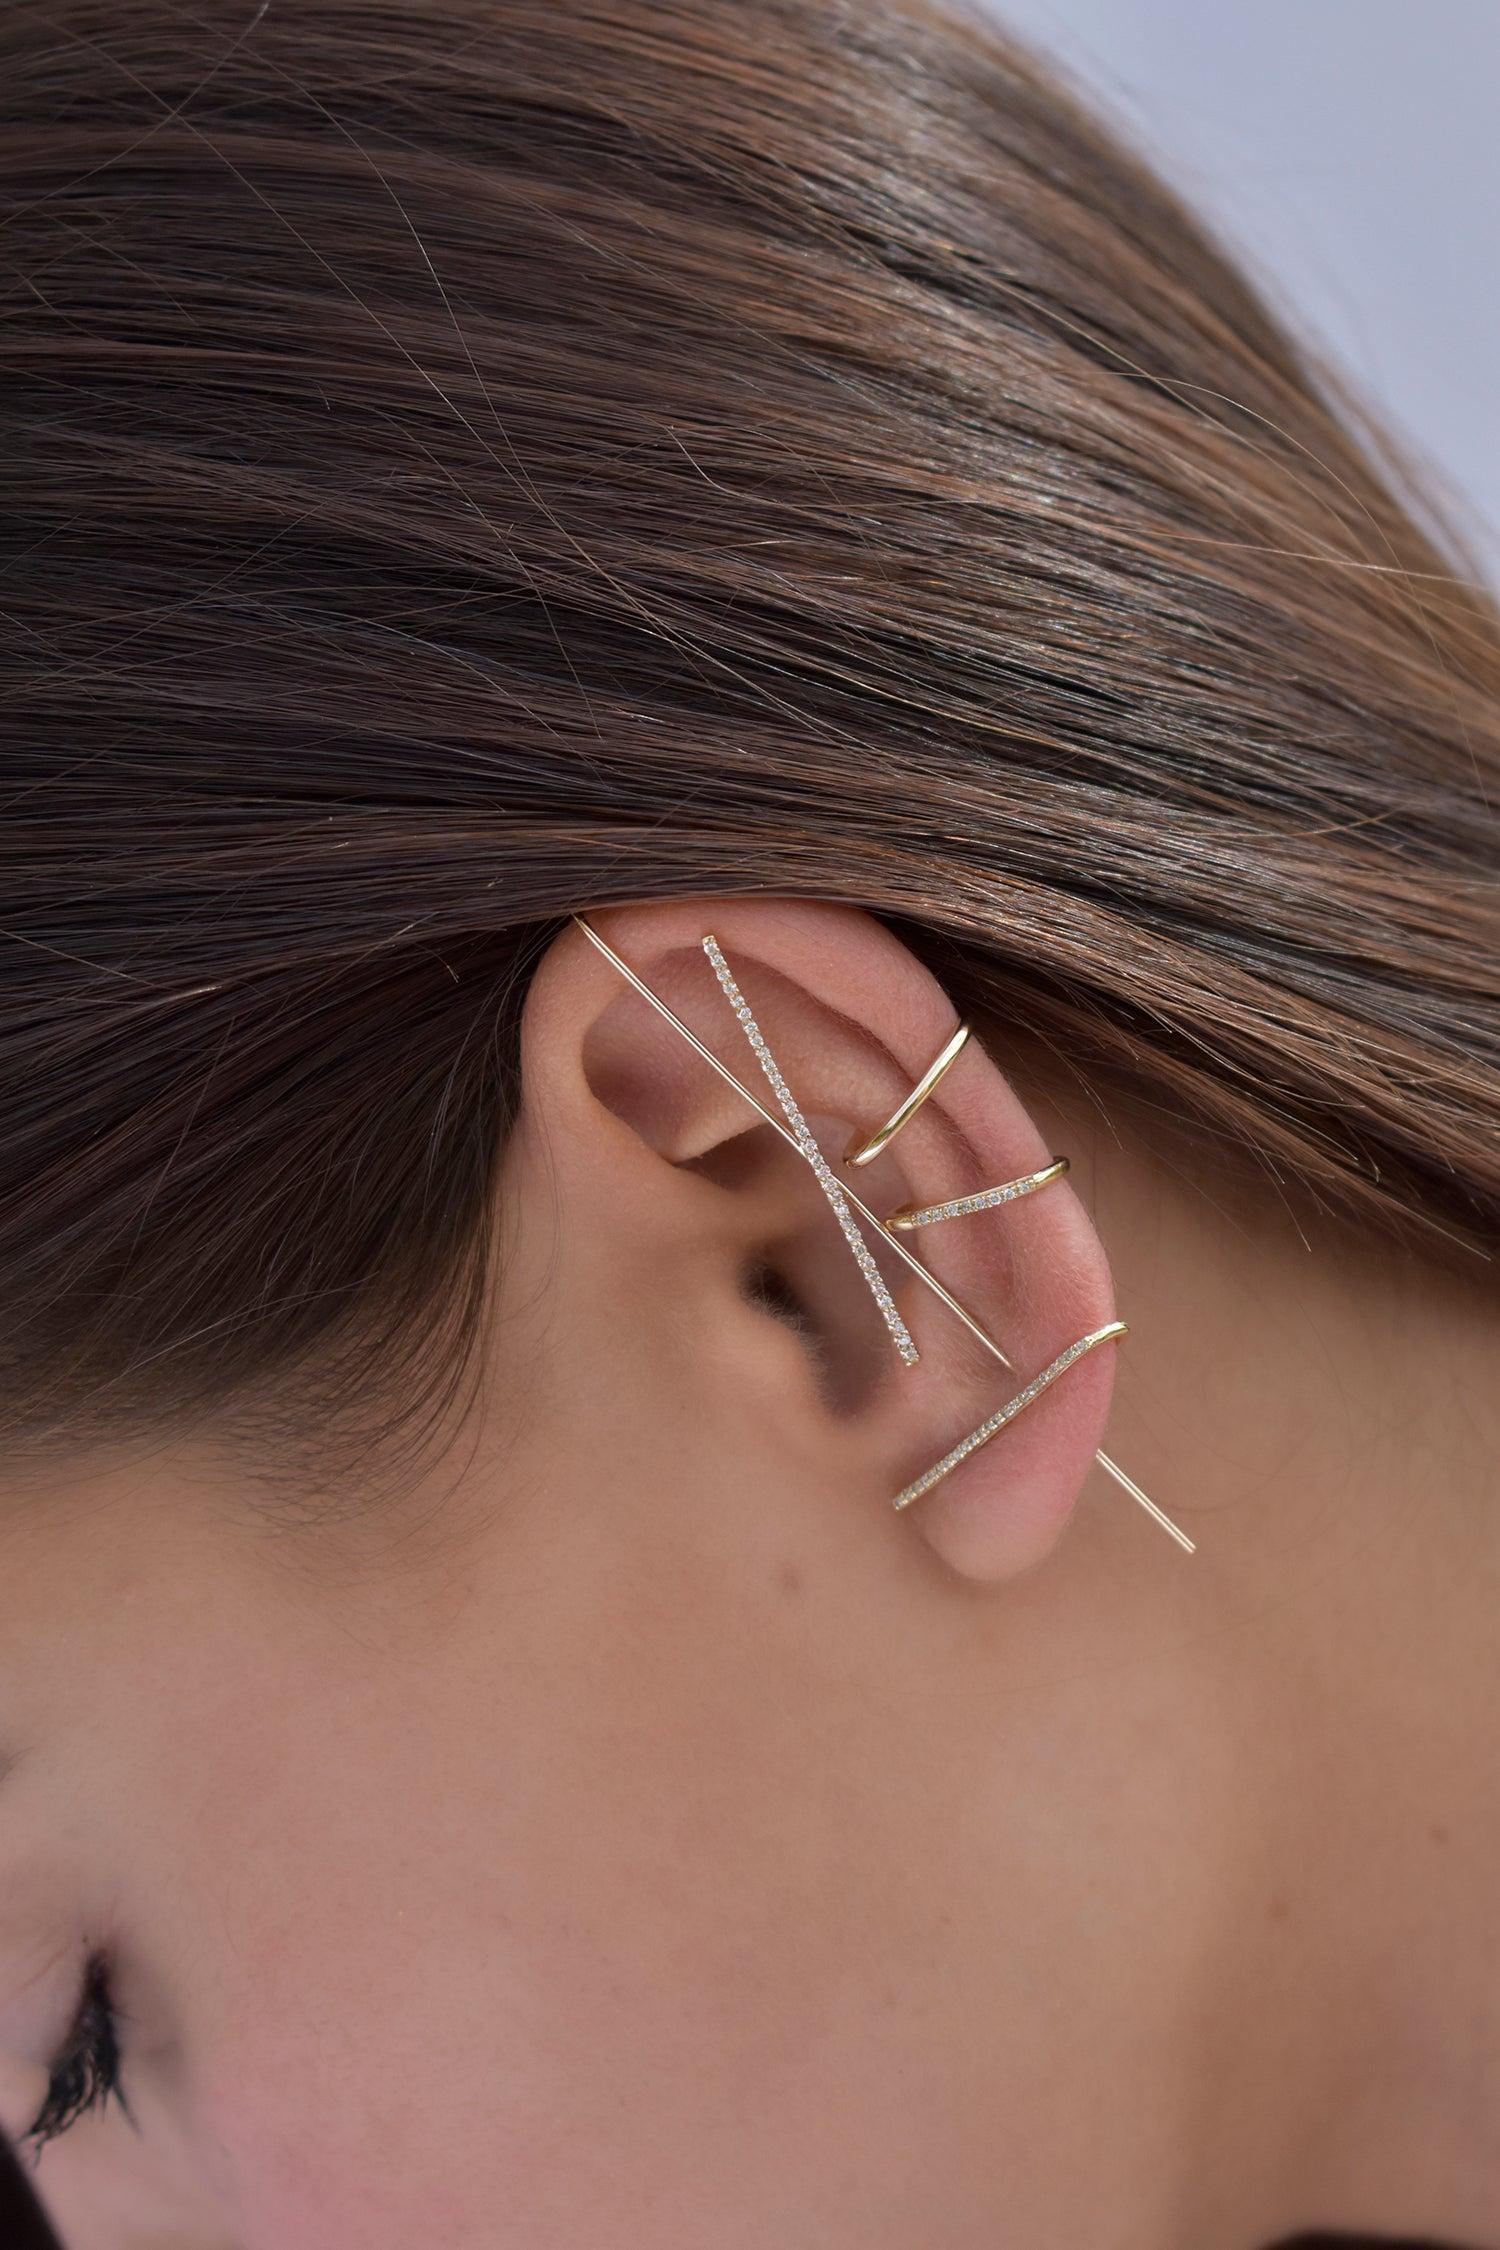 The Horizon Needle Earring is constructed of a delicate gold needle like rod featuring a cross bar adorned with diamonds. This style creates a striking illusion on your ear. Wear it solo or in combination with other styles for a unique look. 

How